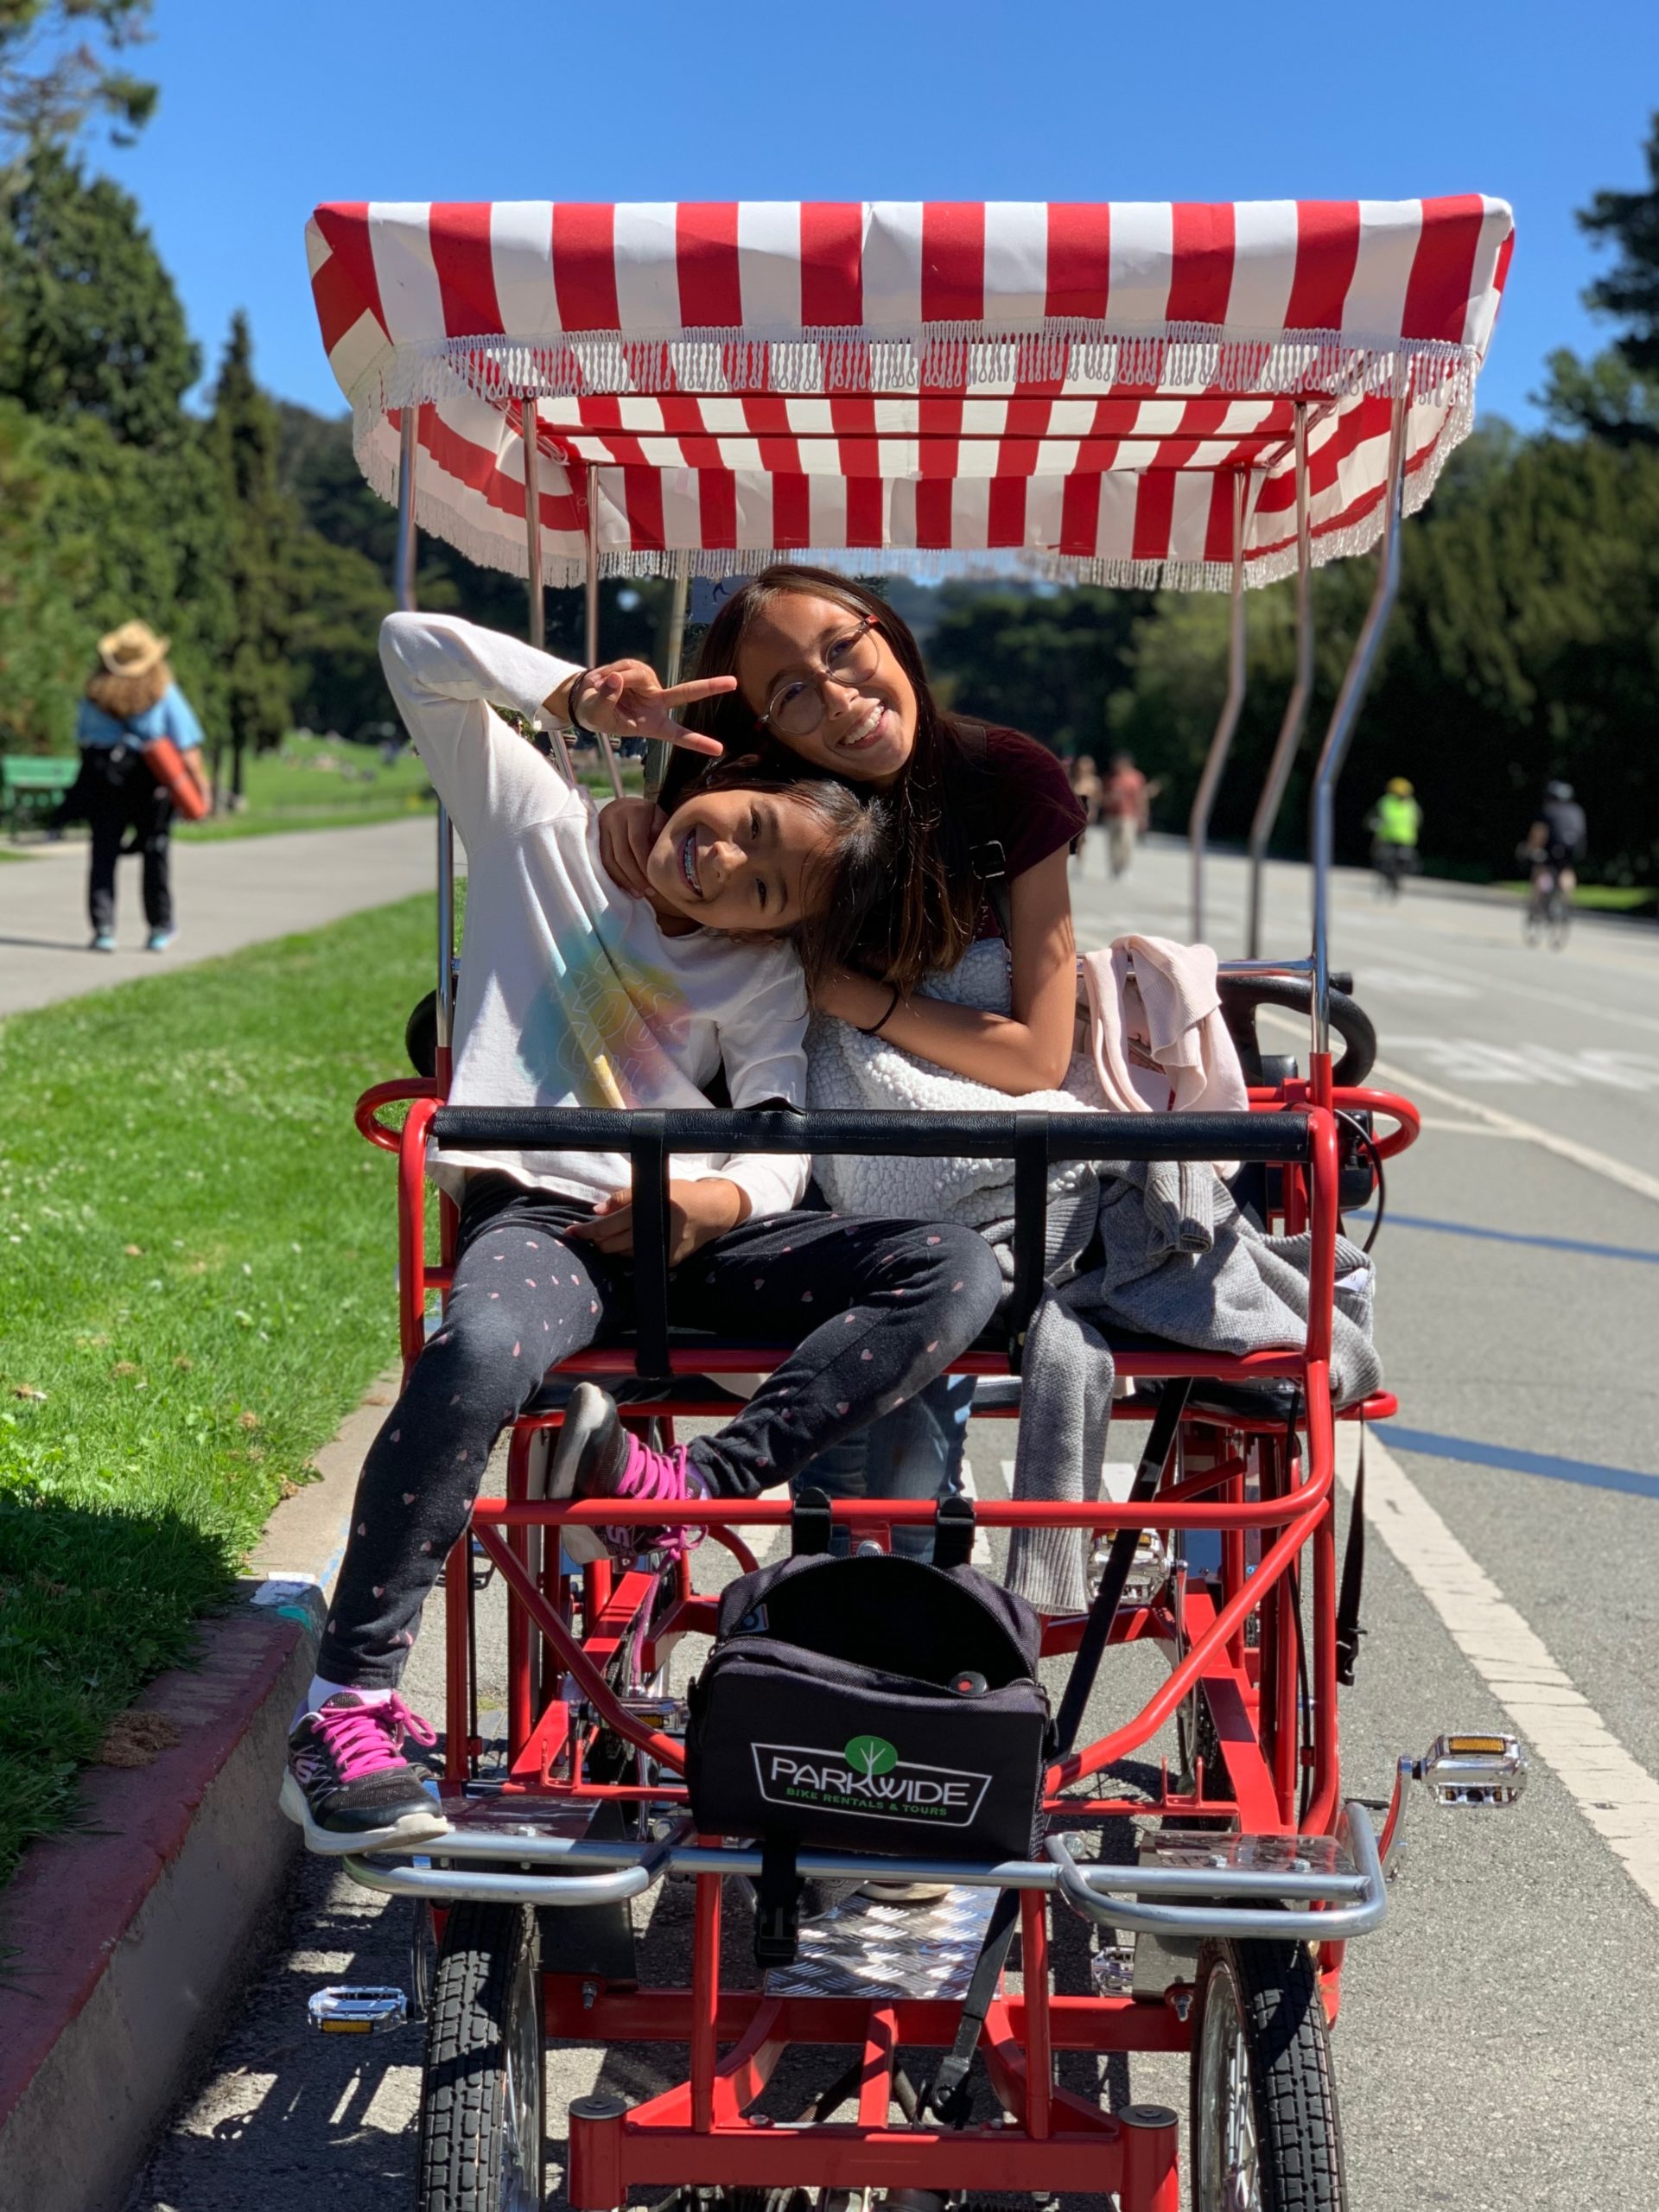 Two girls on a surrey bike in Golden Gate Park